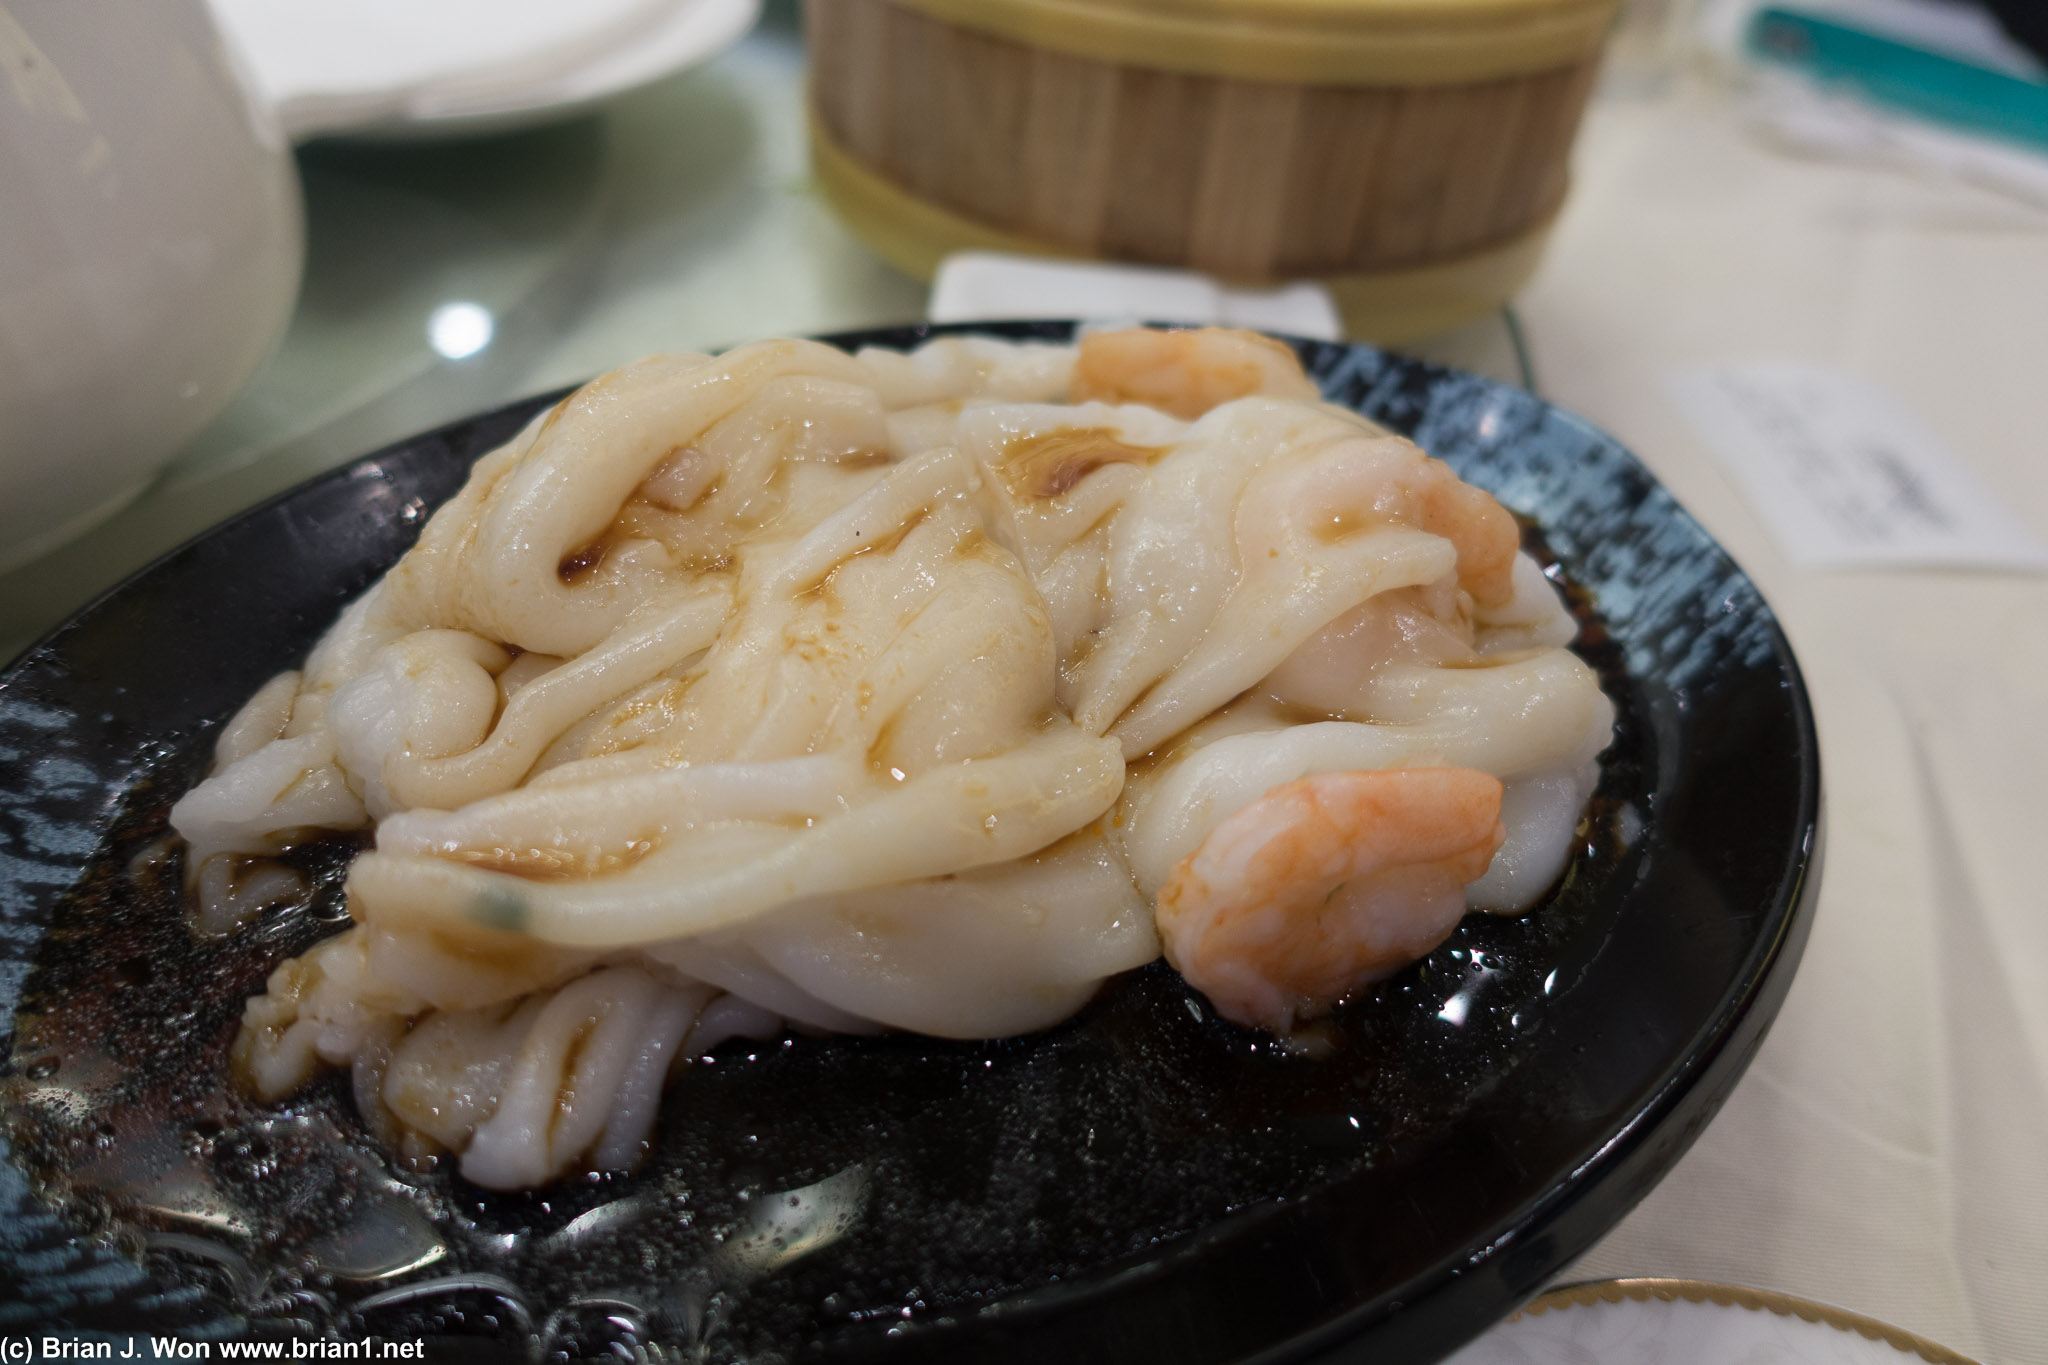 "Twisted" har cheung fun. Just means your shrimp fall out before you eat it. Meh.